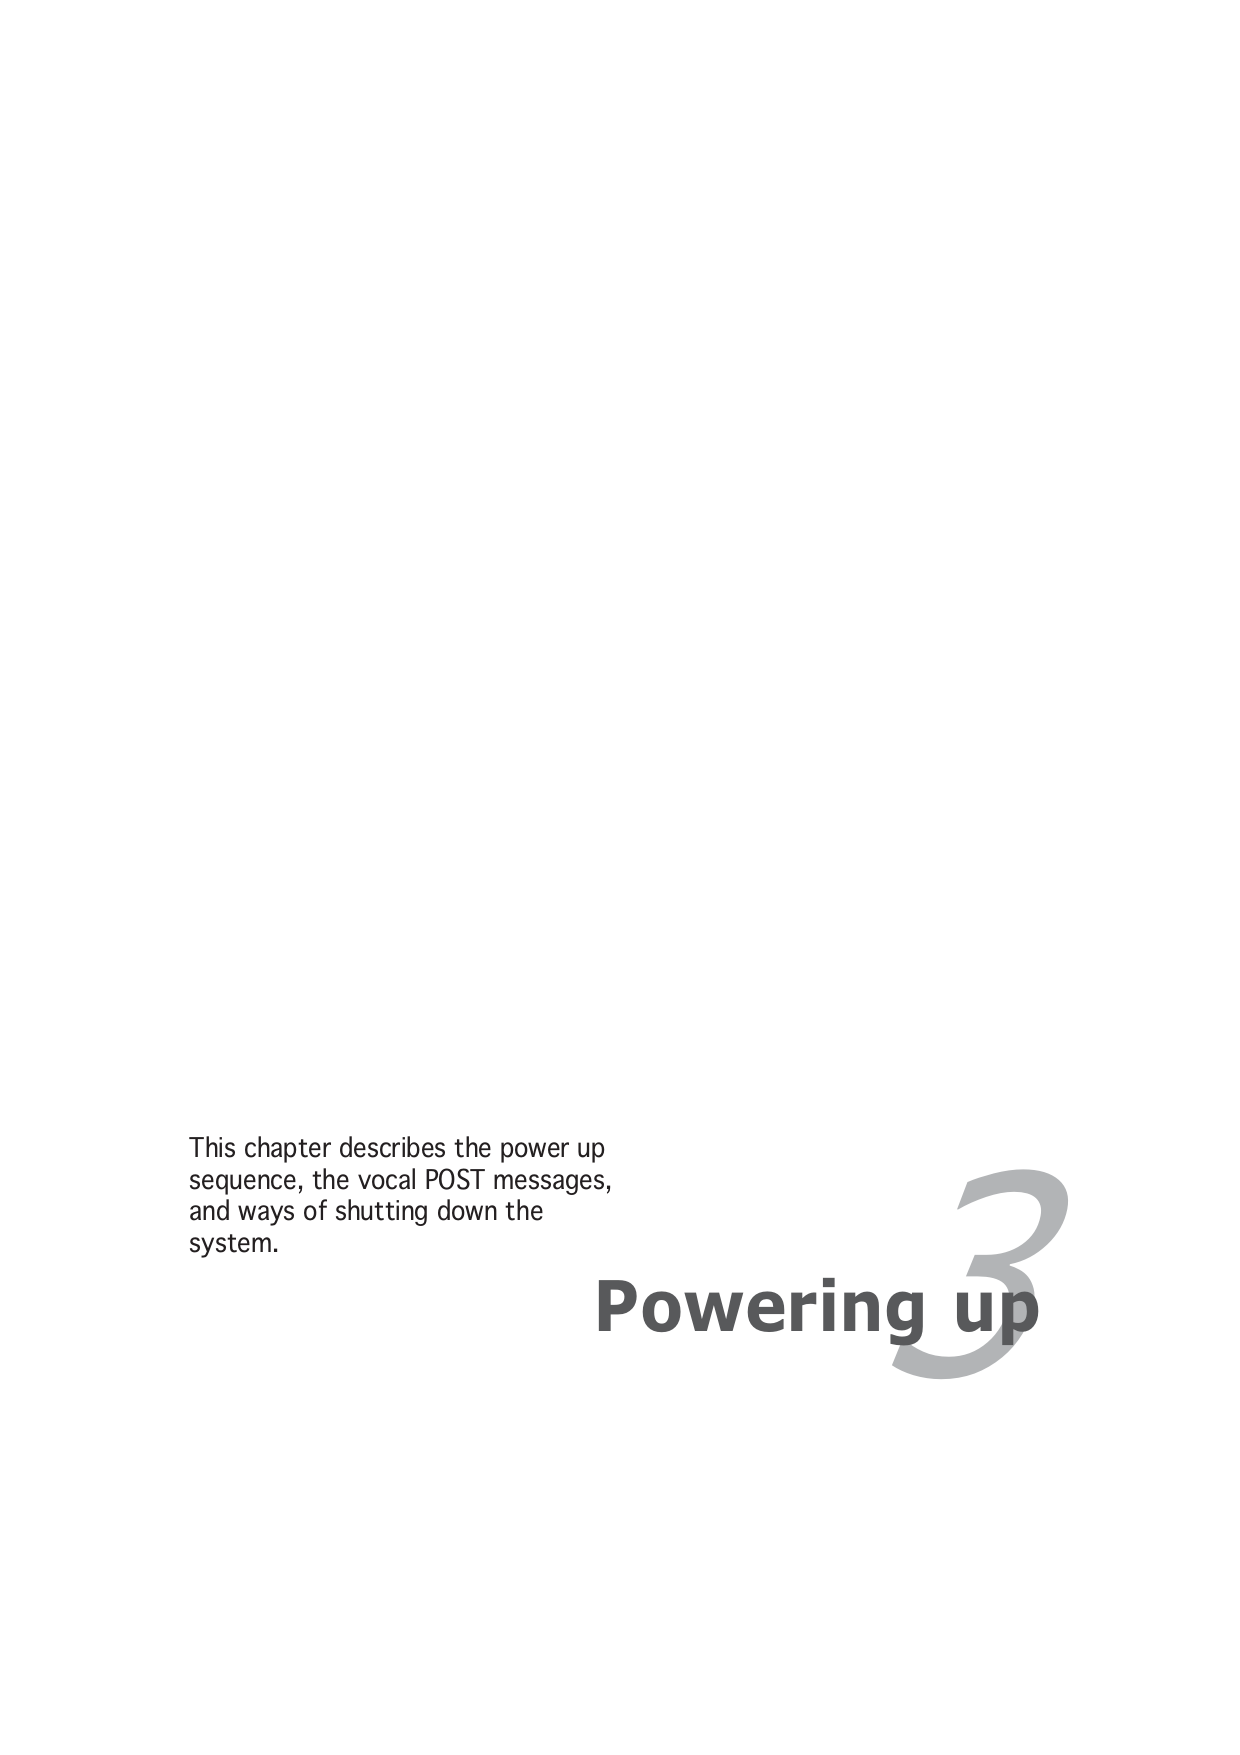 3Powering upThis chapter describes the power upsequence, the vocal POST messages,and ways of shutting down thesystem.